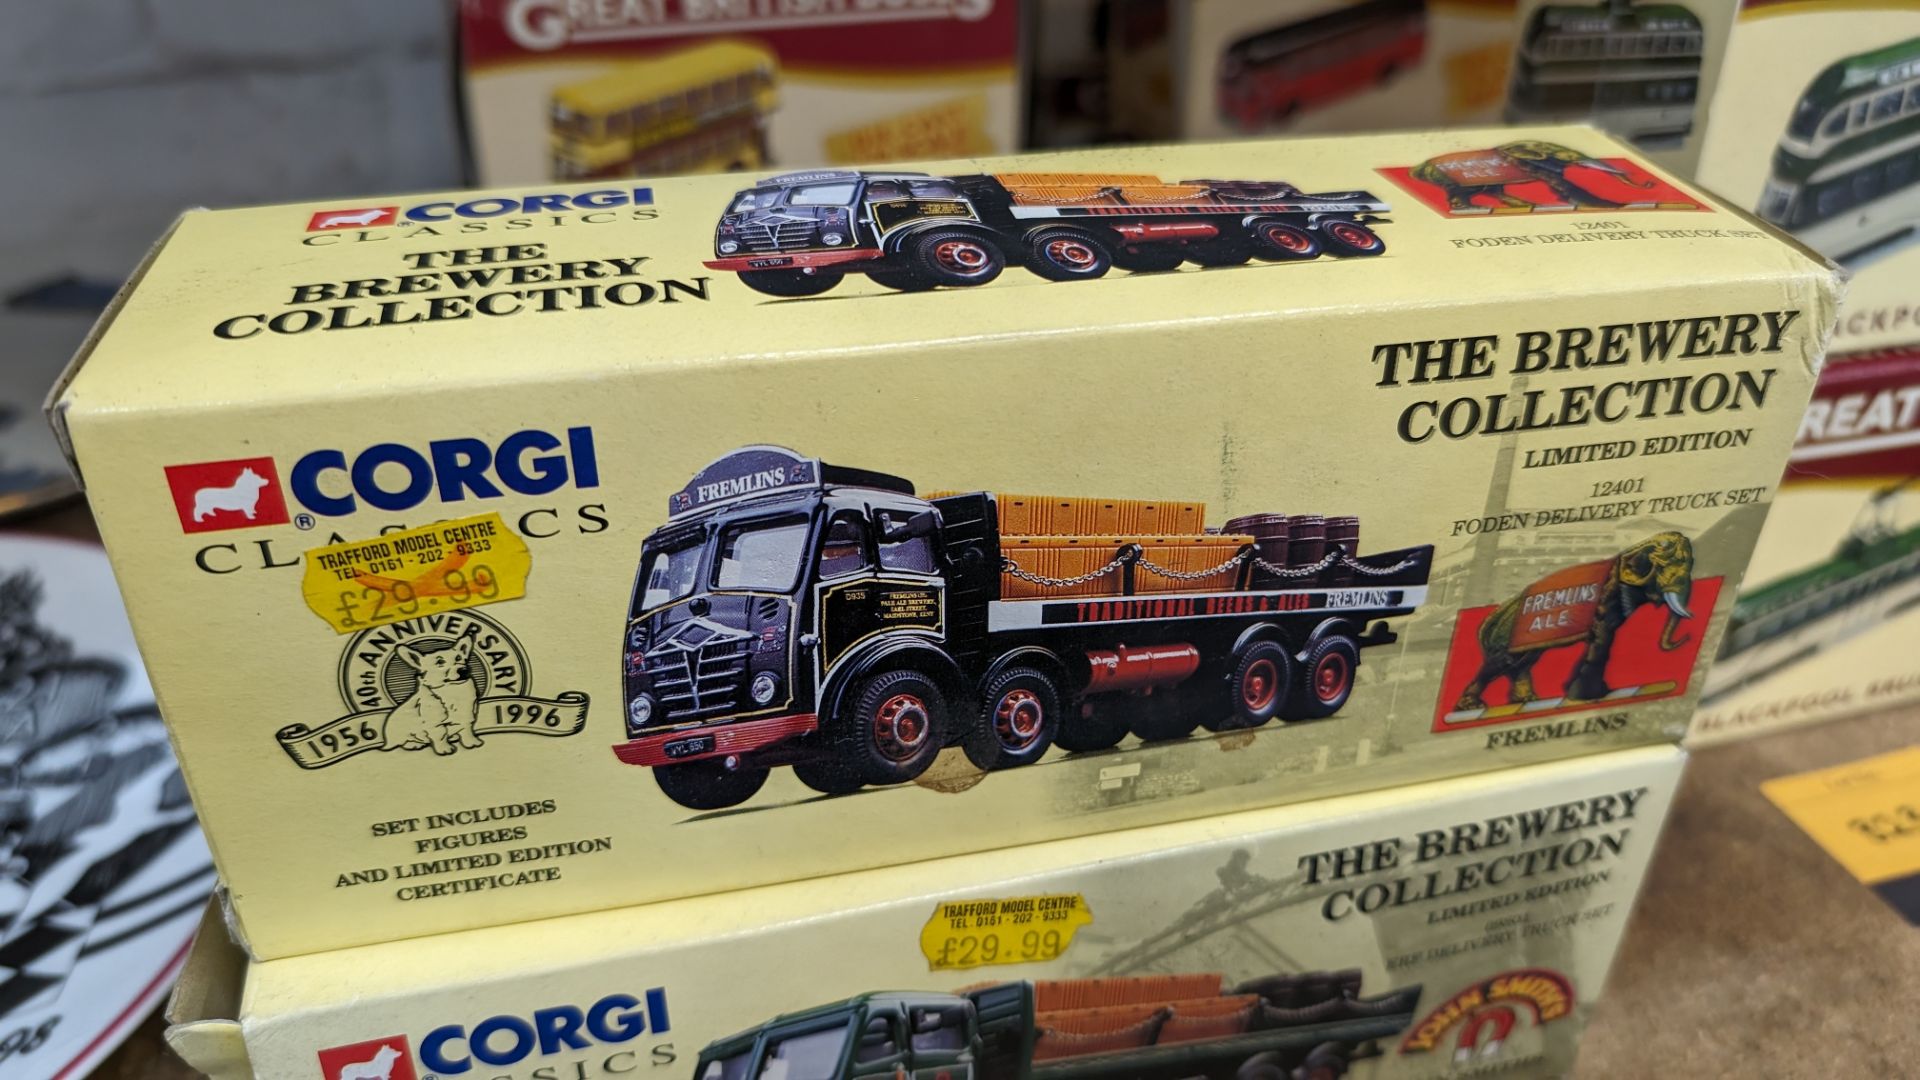 2 off Corgi classics brewery collection limited edition delivery truck sets (John Smiths & Fremlins) - Image 3 of 6